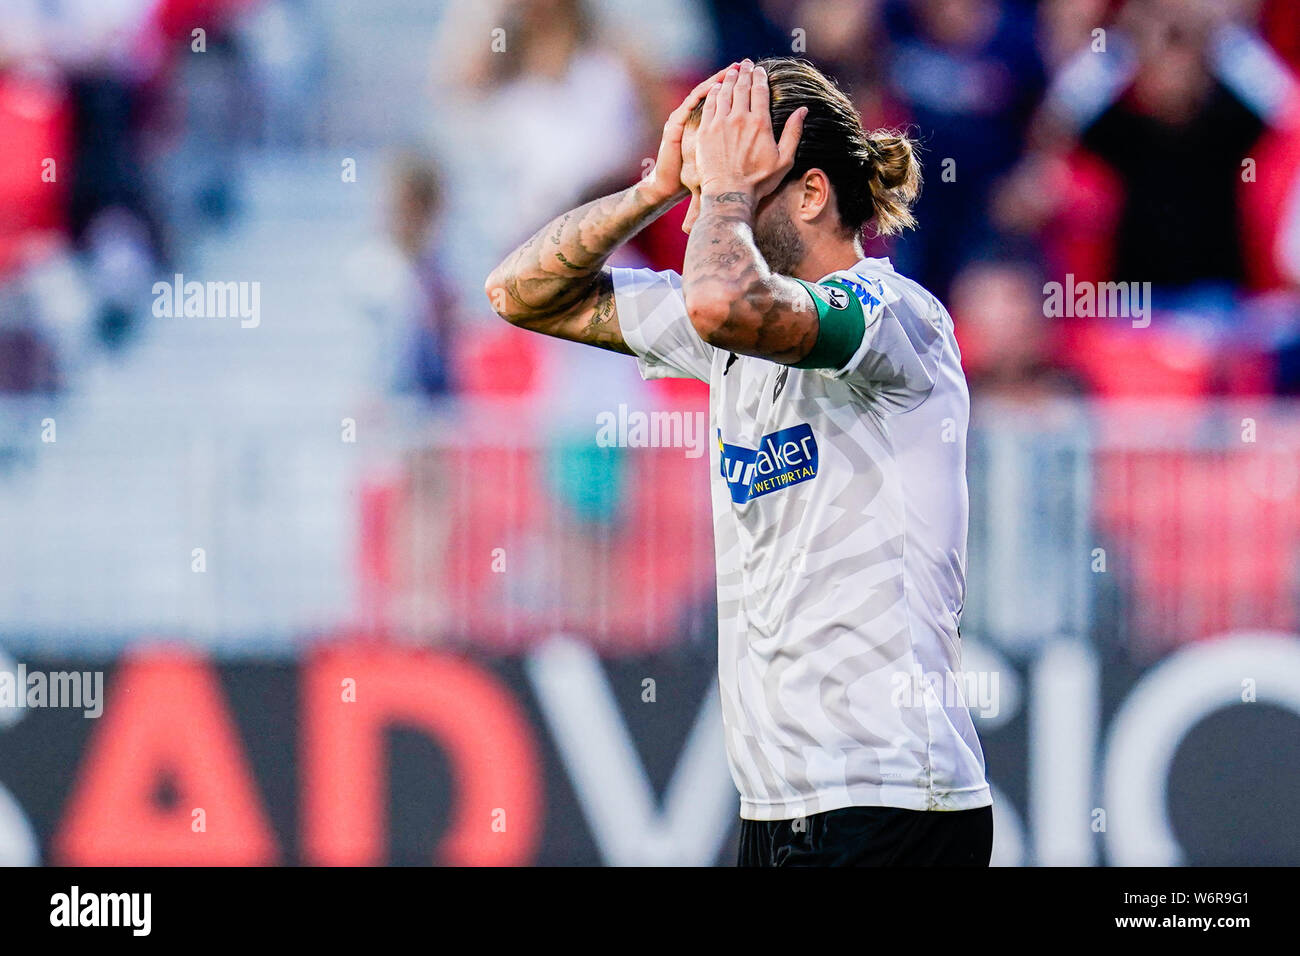 Sandhausen, Germany. 02nd Aug, 2019. Soccer: 2nd Bundesliga, SV Sandhausen - VfL Osnabrück, 2nd matchday, in Hardtwaldstadion. Sandhausen's Dennis Diekmeier gesticulated. Credit: Uwe Anspach/dpa - IMPORTANT NOTE: In accordance with the requirements of the DFL Deutsche Fußball Liga or the DFB Deutscher Fußball-Bund, it is prohibited to use or have used photographs taken in the stadium and/or the match in the form of sequence images and/or video-like photo sequences./dpa/Alamy Live News Stock Photo